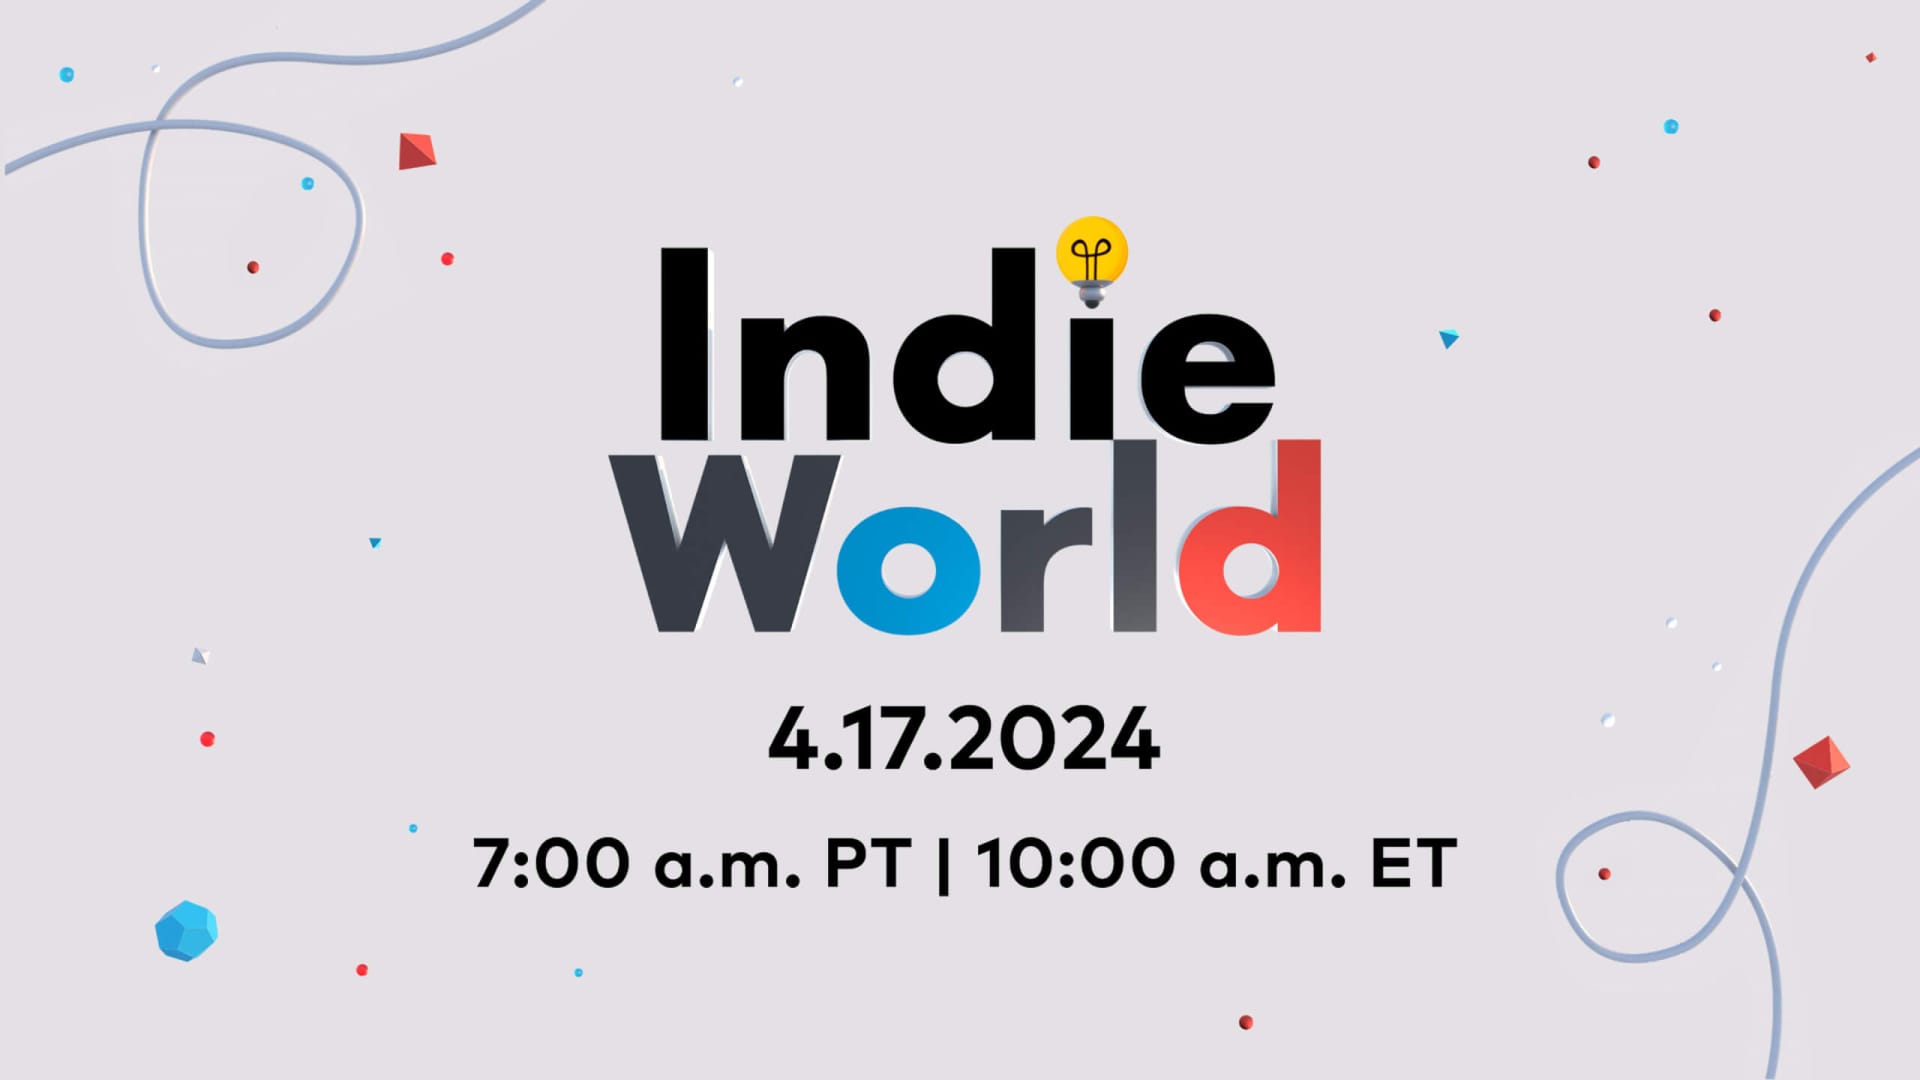 The Nintendo Indie World showcase logo against a gray background